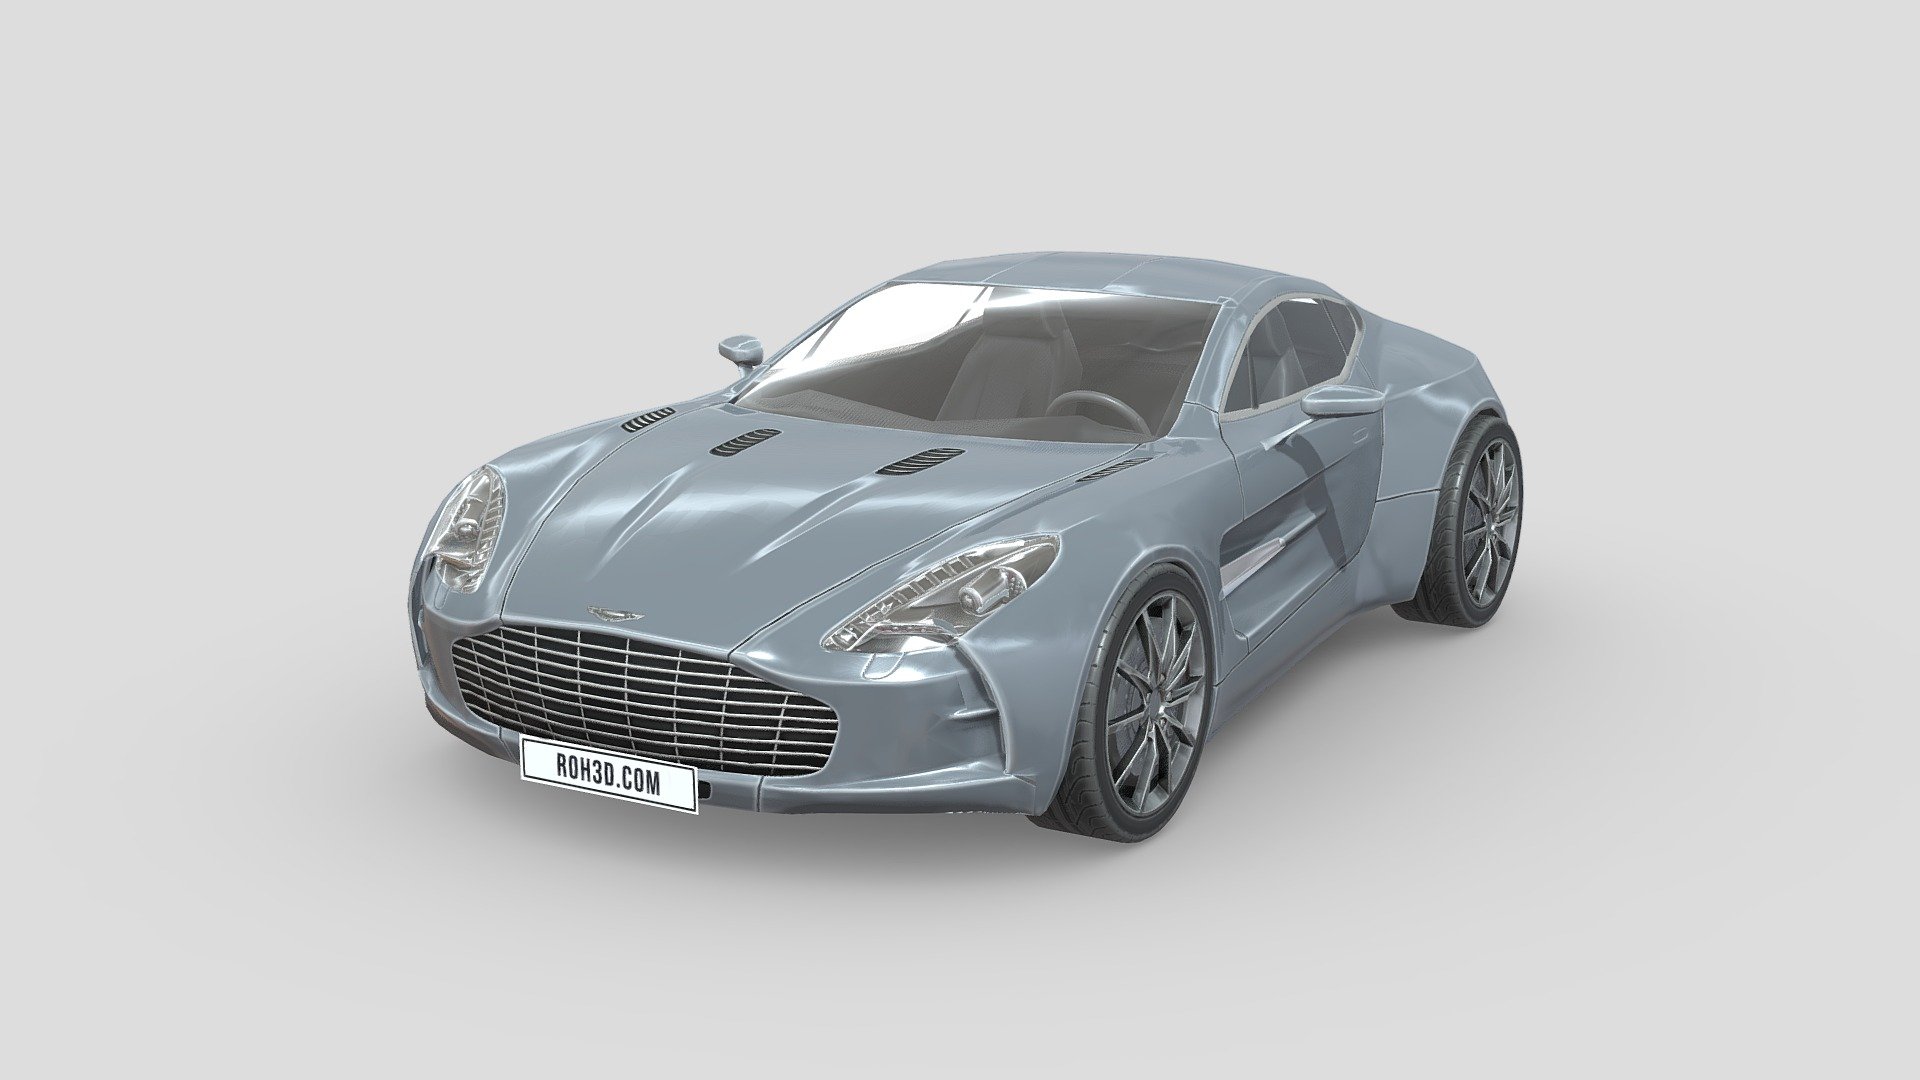 The Aston Martin One-77 is a two-door, two-seater flagship sports car built by the British car manufacturer Aston Martin. The car was first shown at the 2008 Paris Motor Show, although it remained mostly covered by a &ldquo;Savile Row tailored skirt